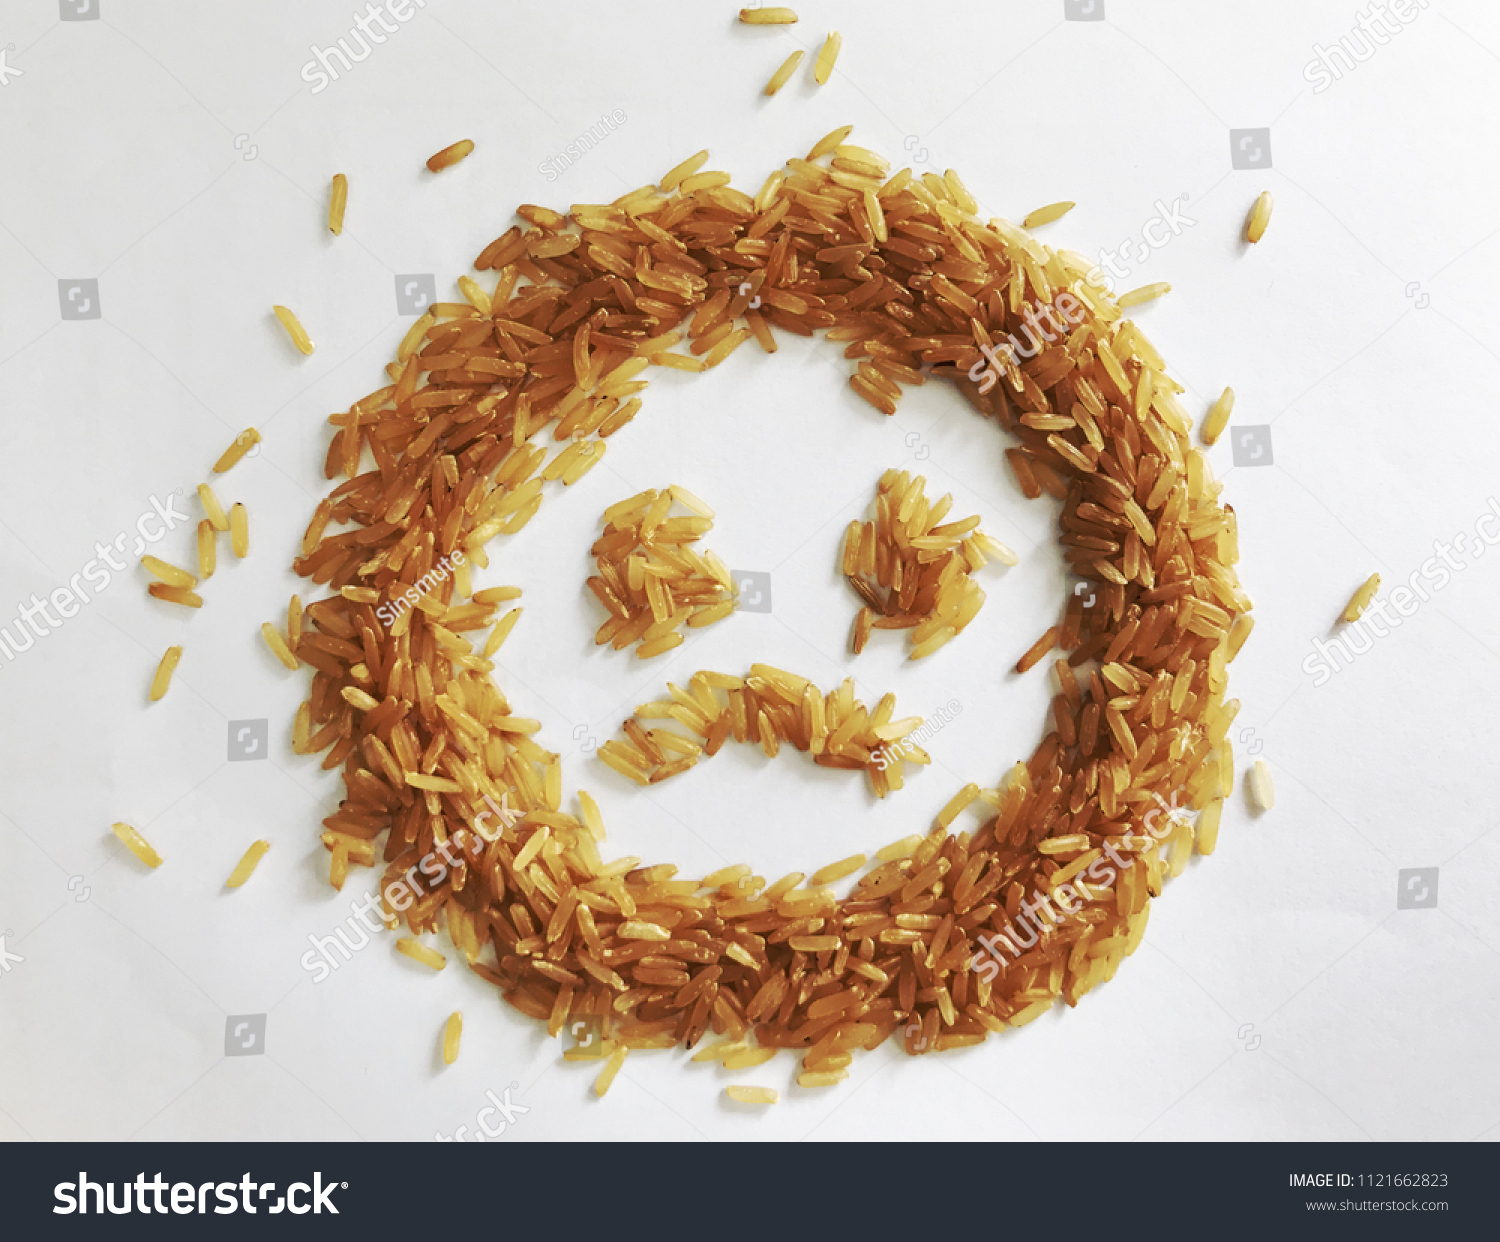 stock-photo-brown-rice-is-sad-face-11216